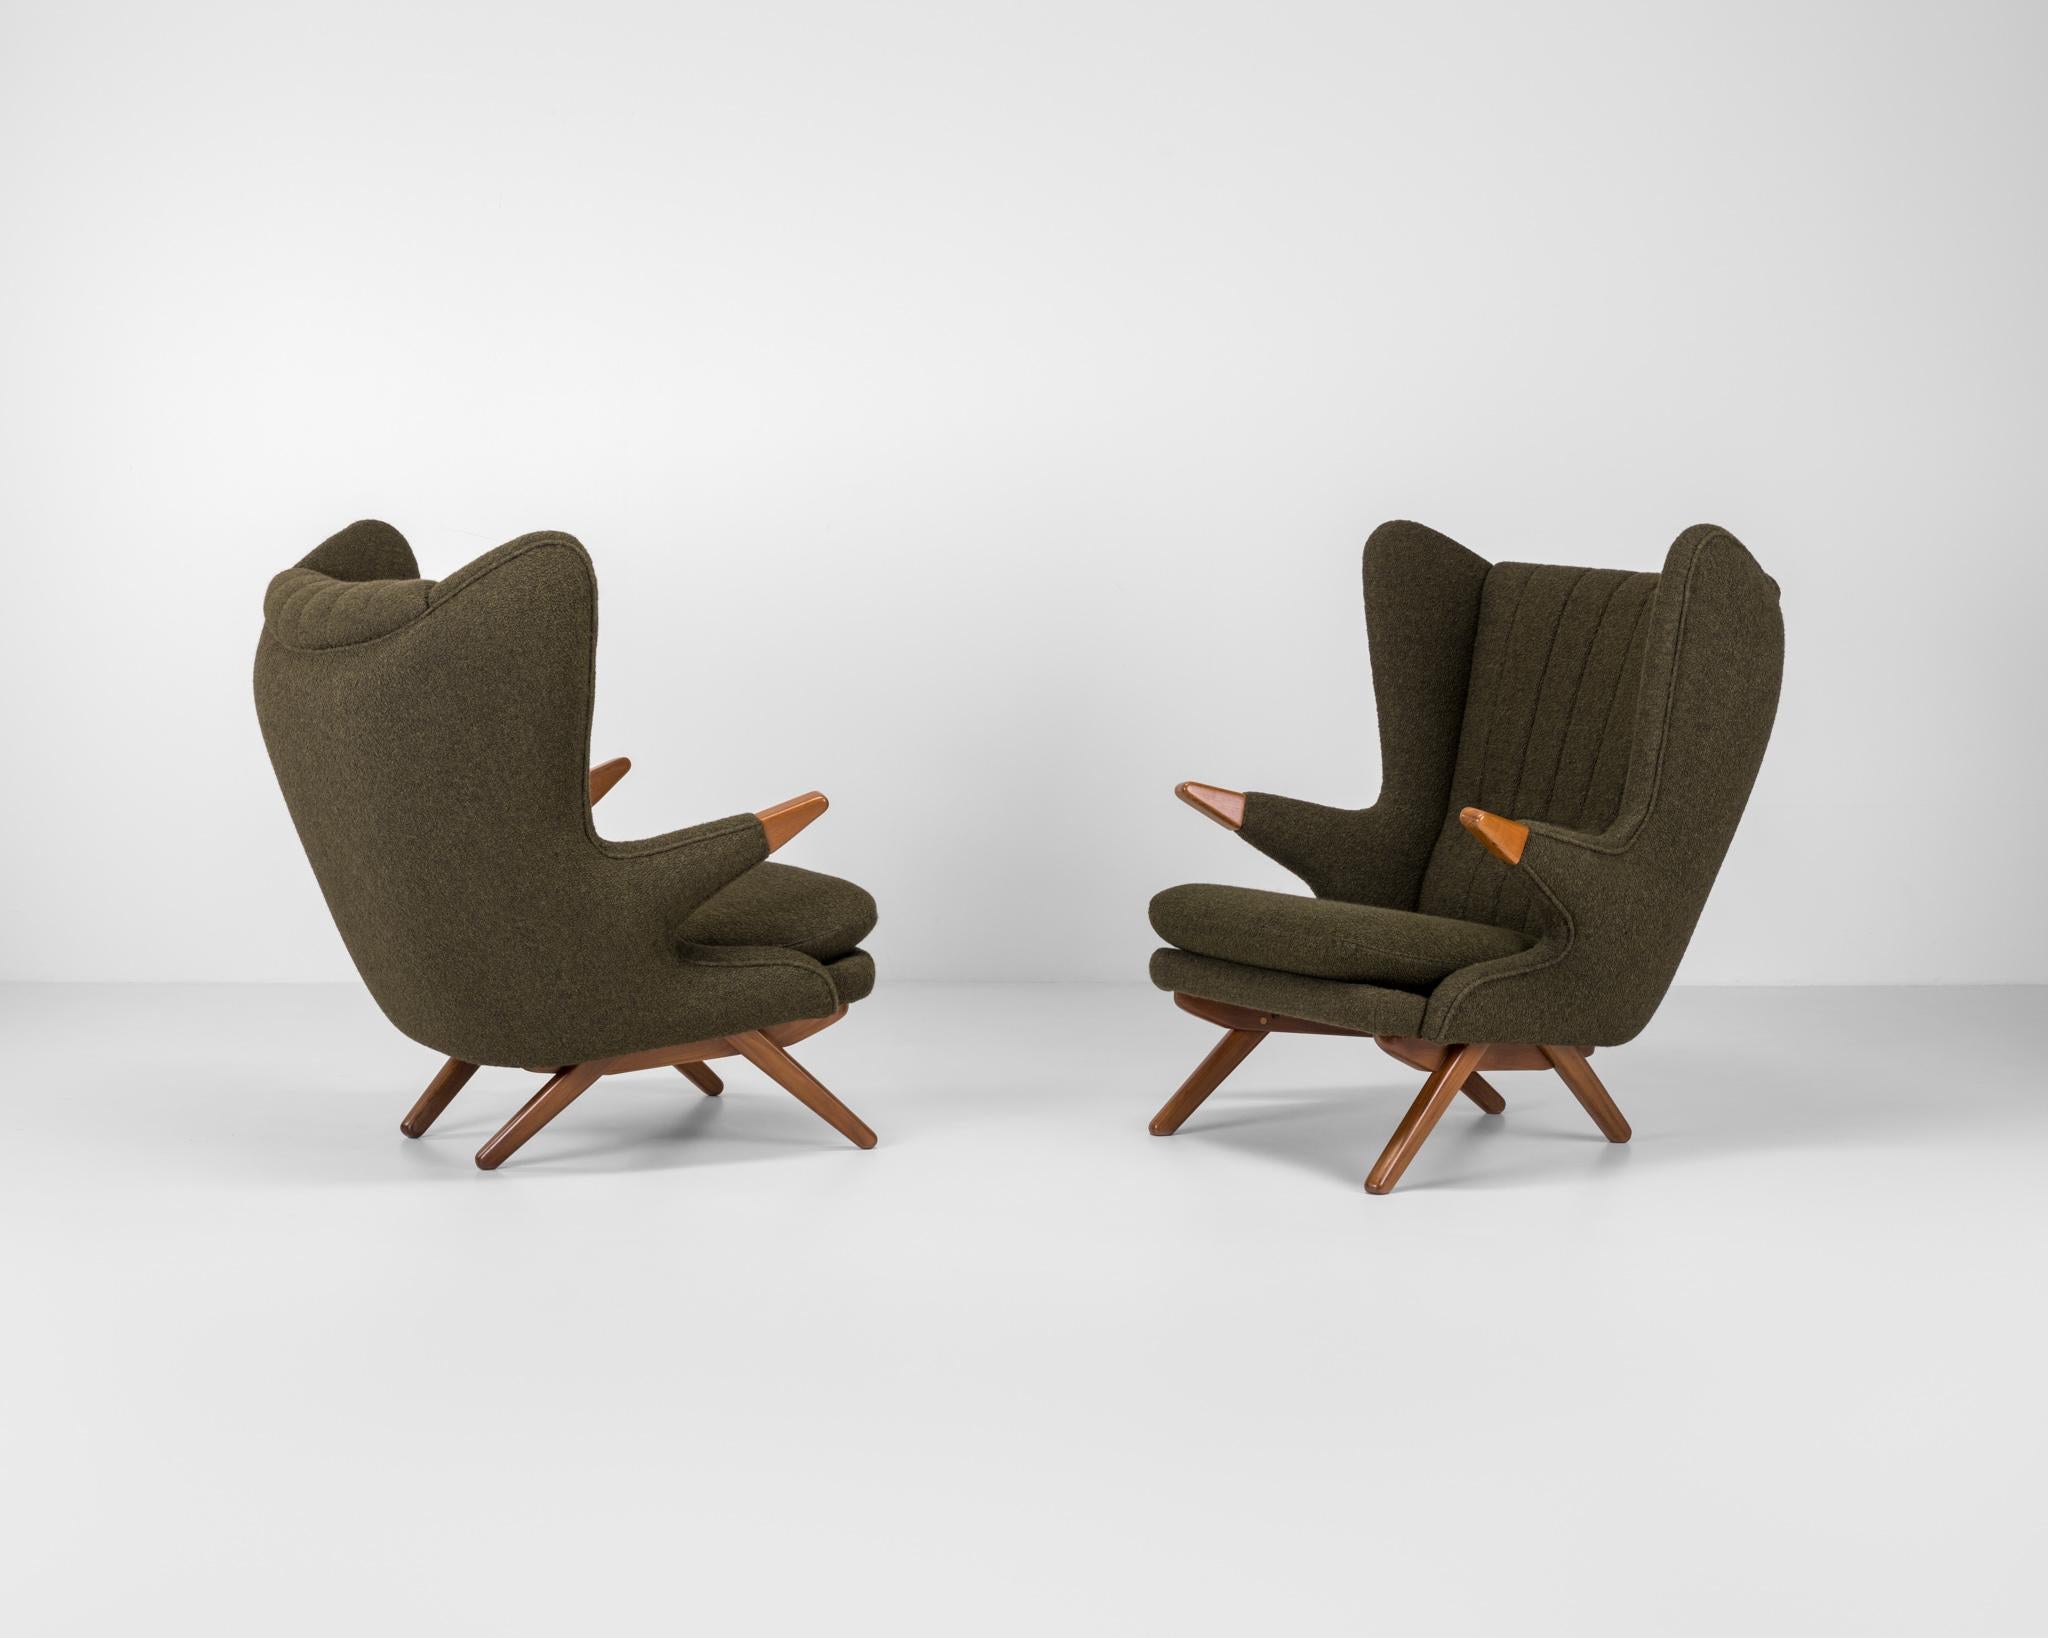 Beautifull pair of lounge chair designed by Svend Skipper and produced by Skipper Møbelfabrik in Denmark circa 1950's. 

The design was created in 1956 and often referred as 